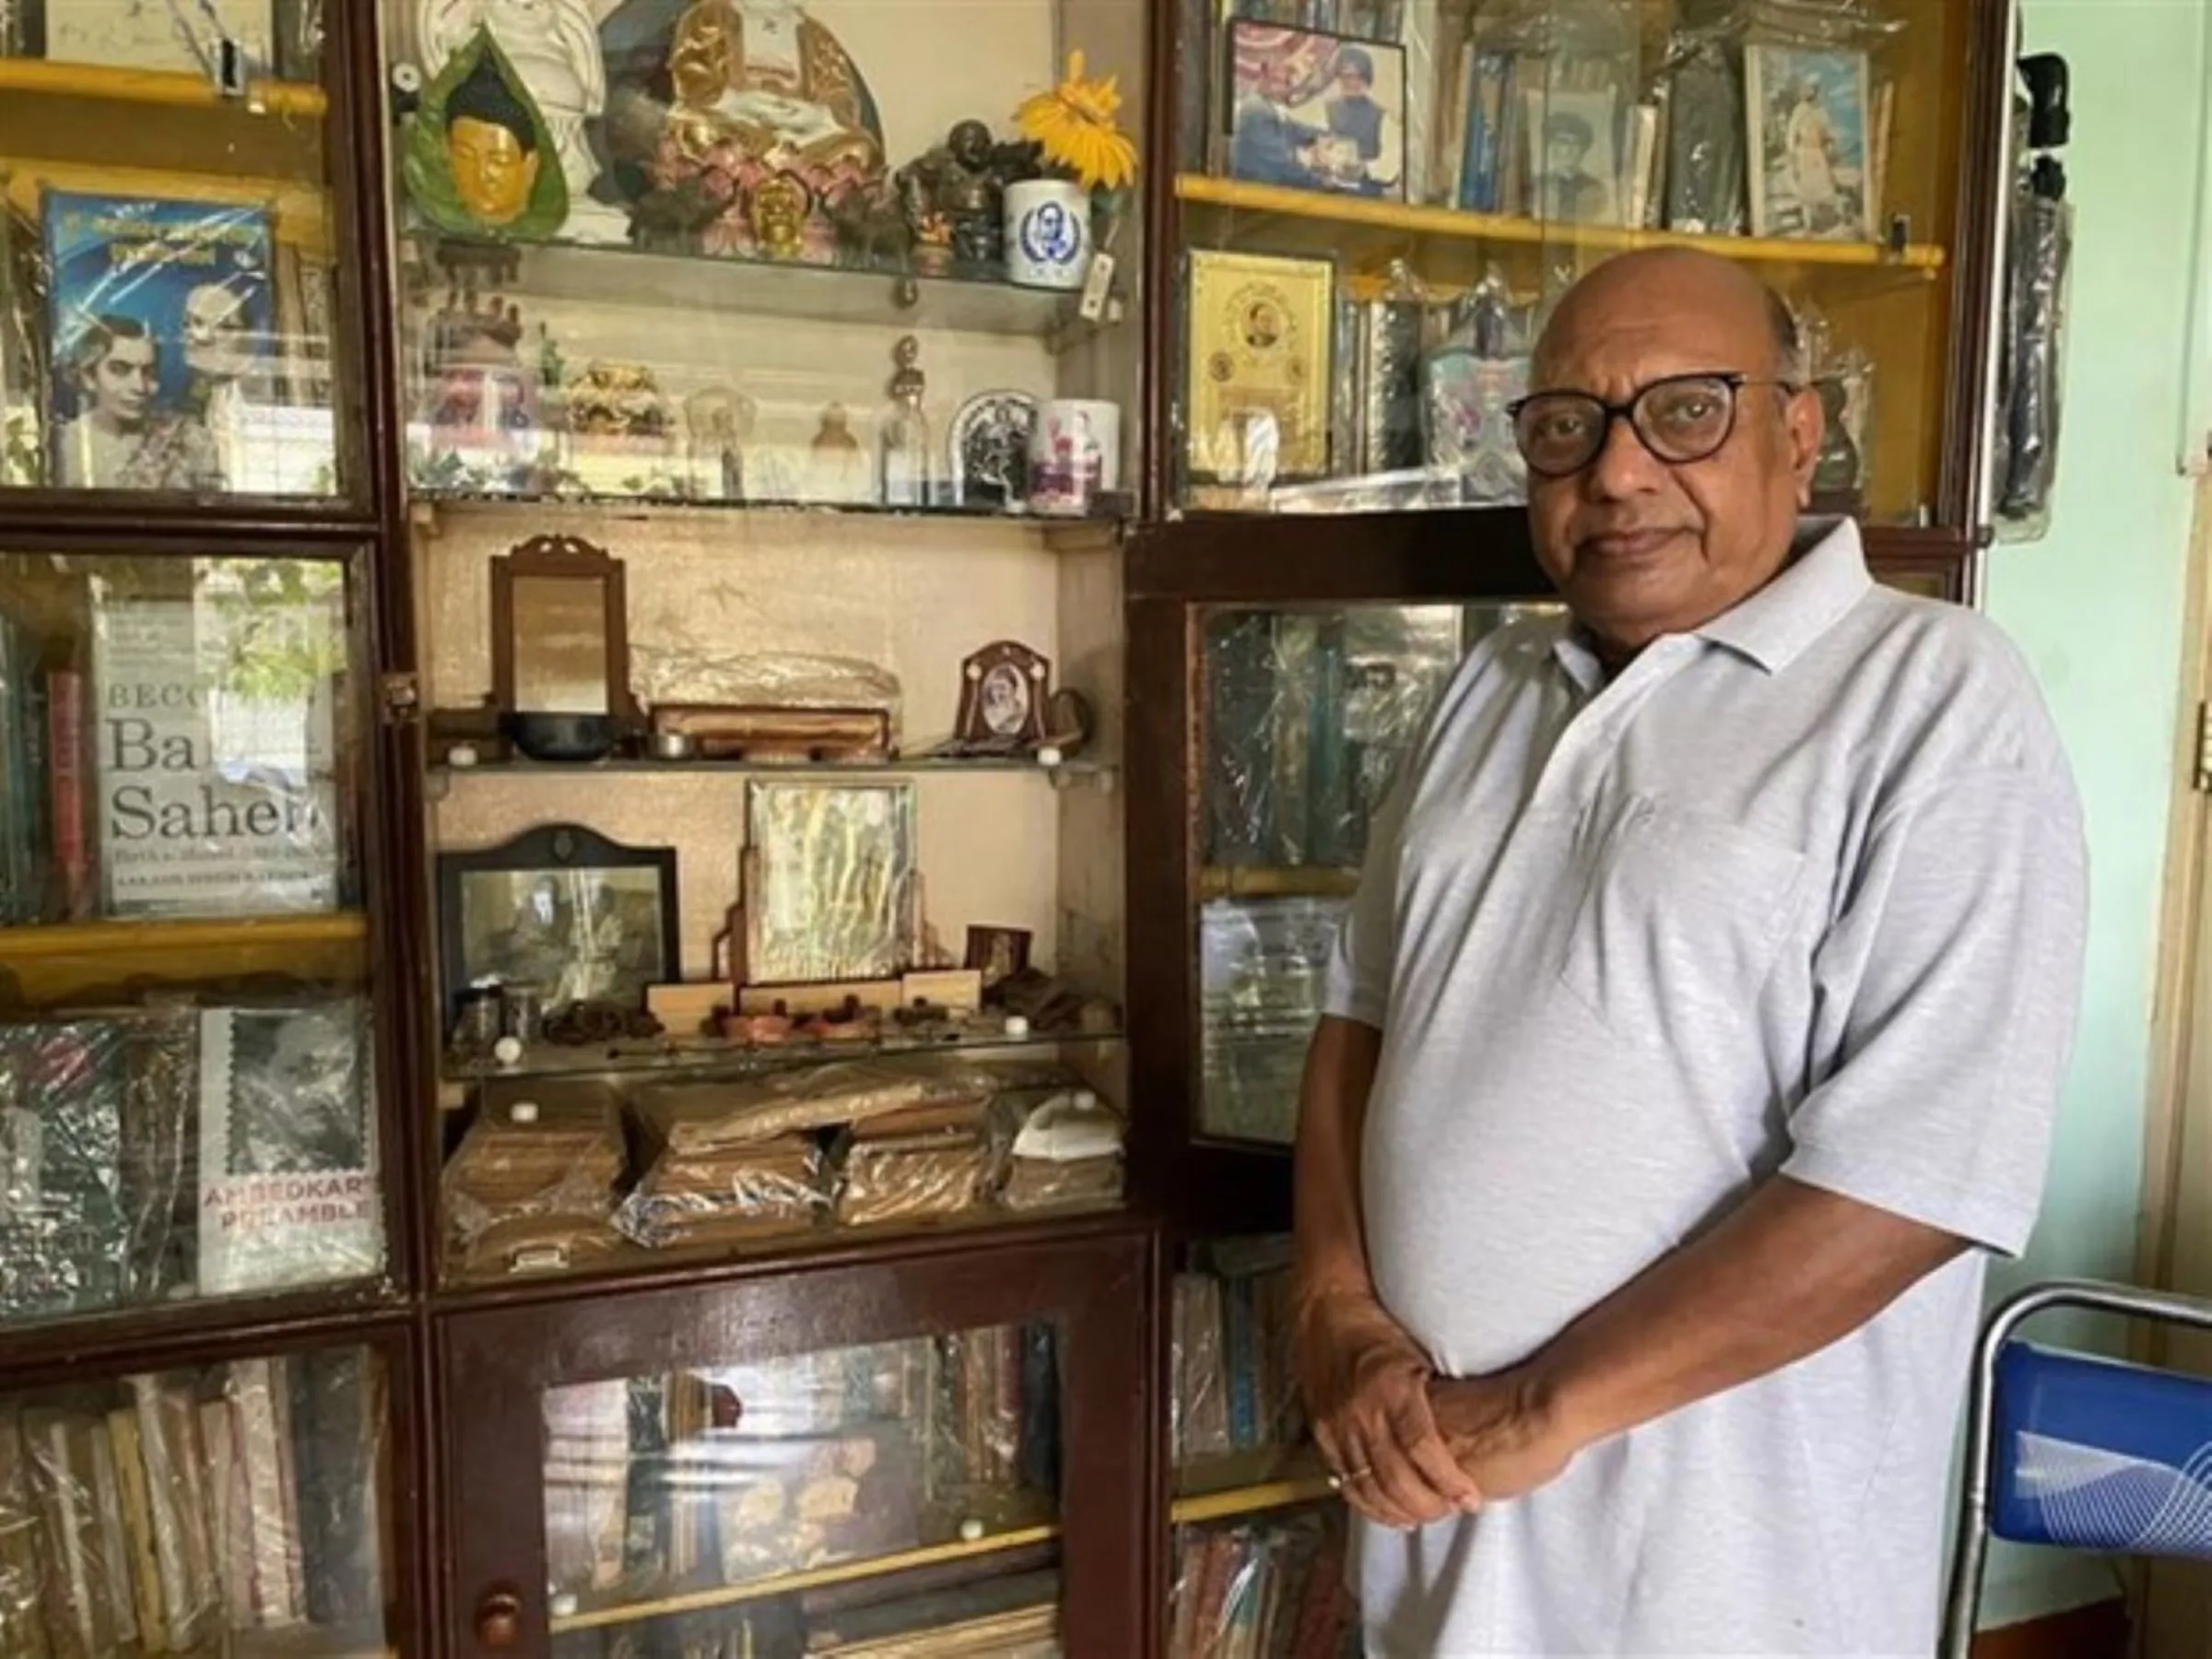 Dalit archivist Vijay Surwade, 69, poses in his apartment with his collection of dalit leader Babasaheb Ambedkar’s personal items in Kalyan on May 11, 2023. Thomson Reuters Foundation/Vidhi Doshi